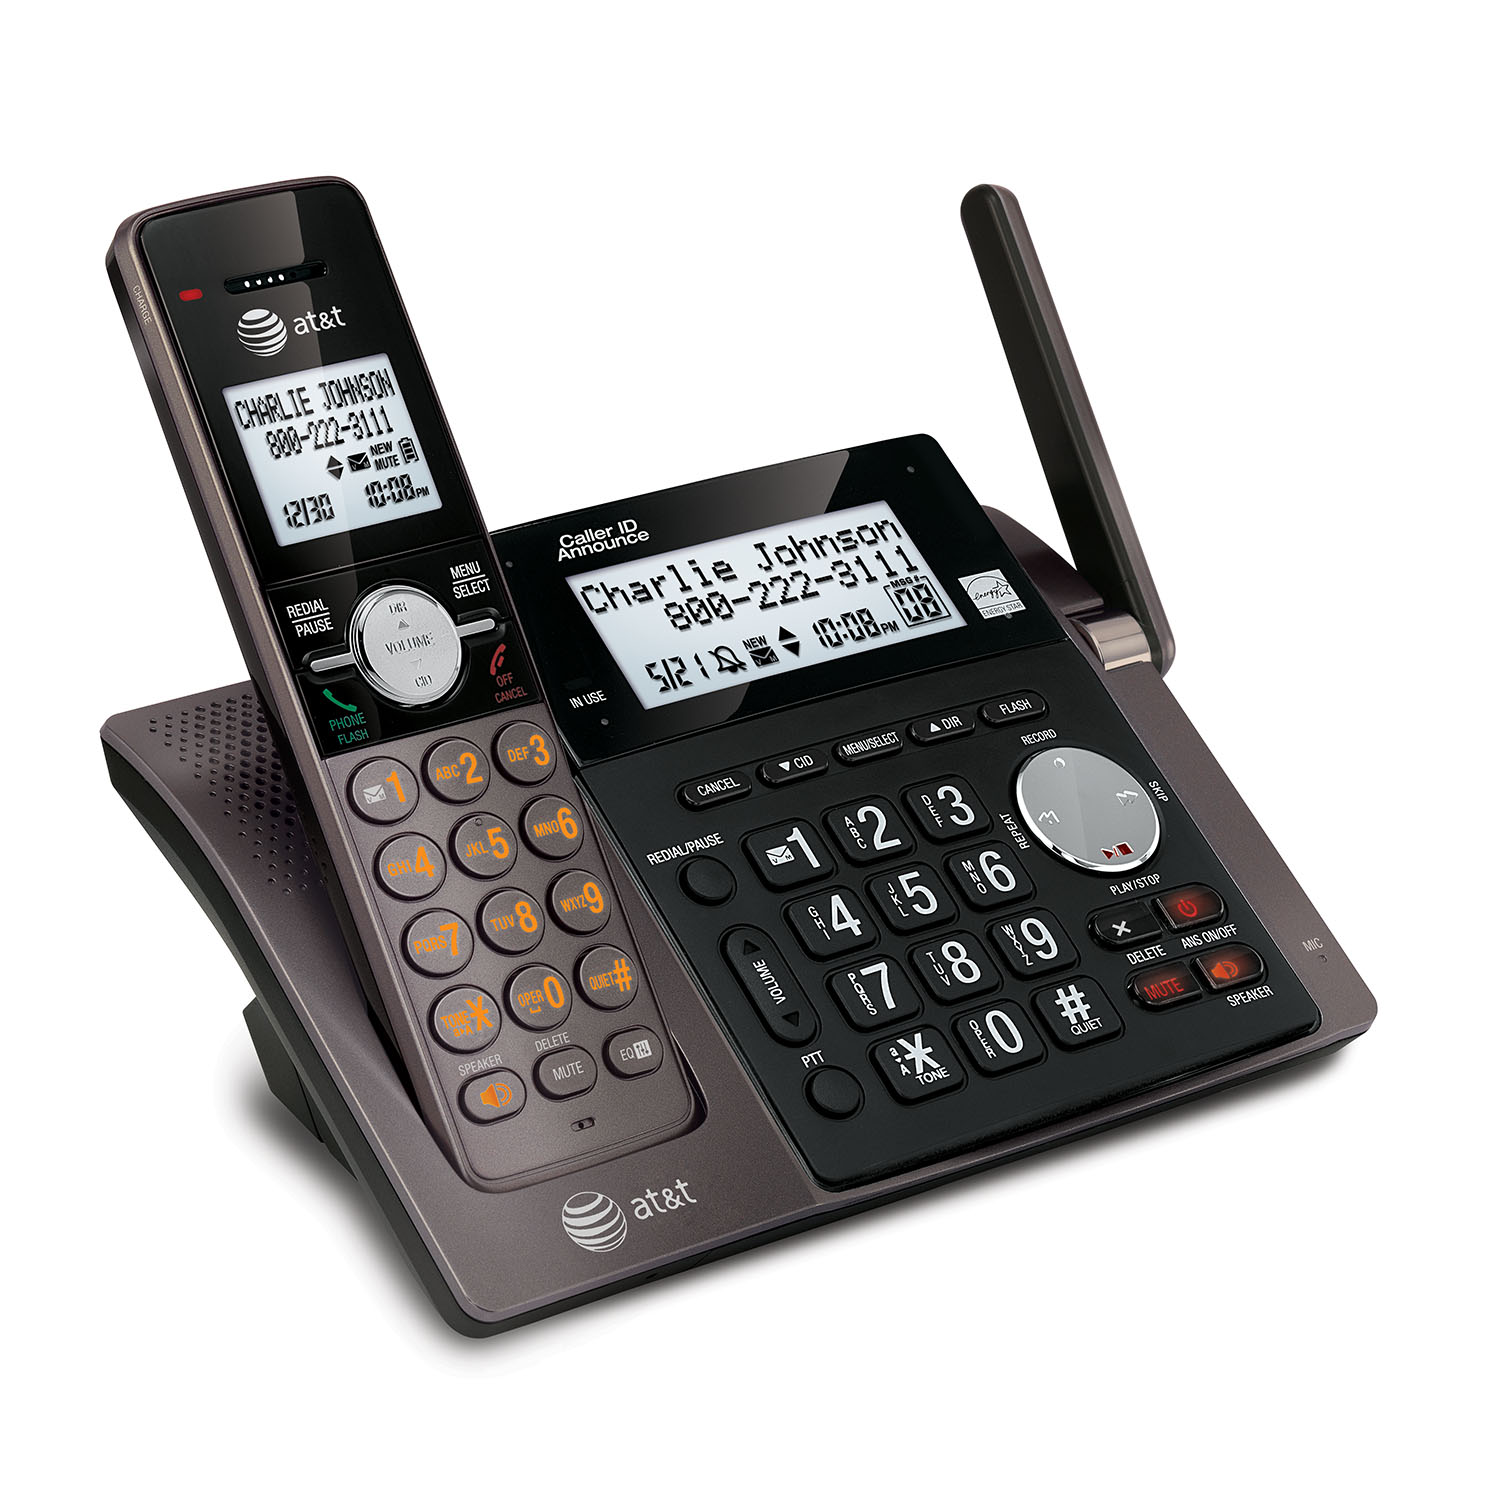 3 handset cordless answering system with caller ID/call waiting - view 2